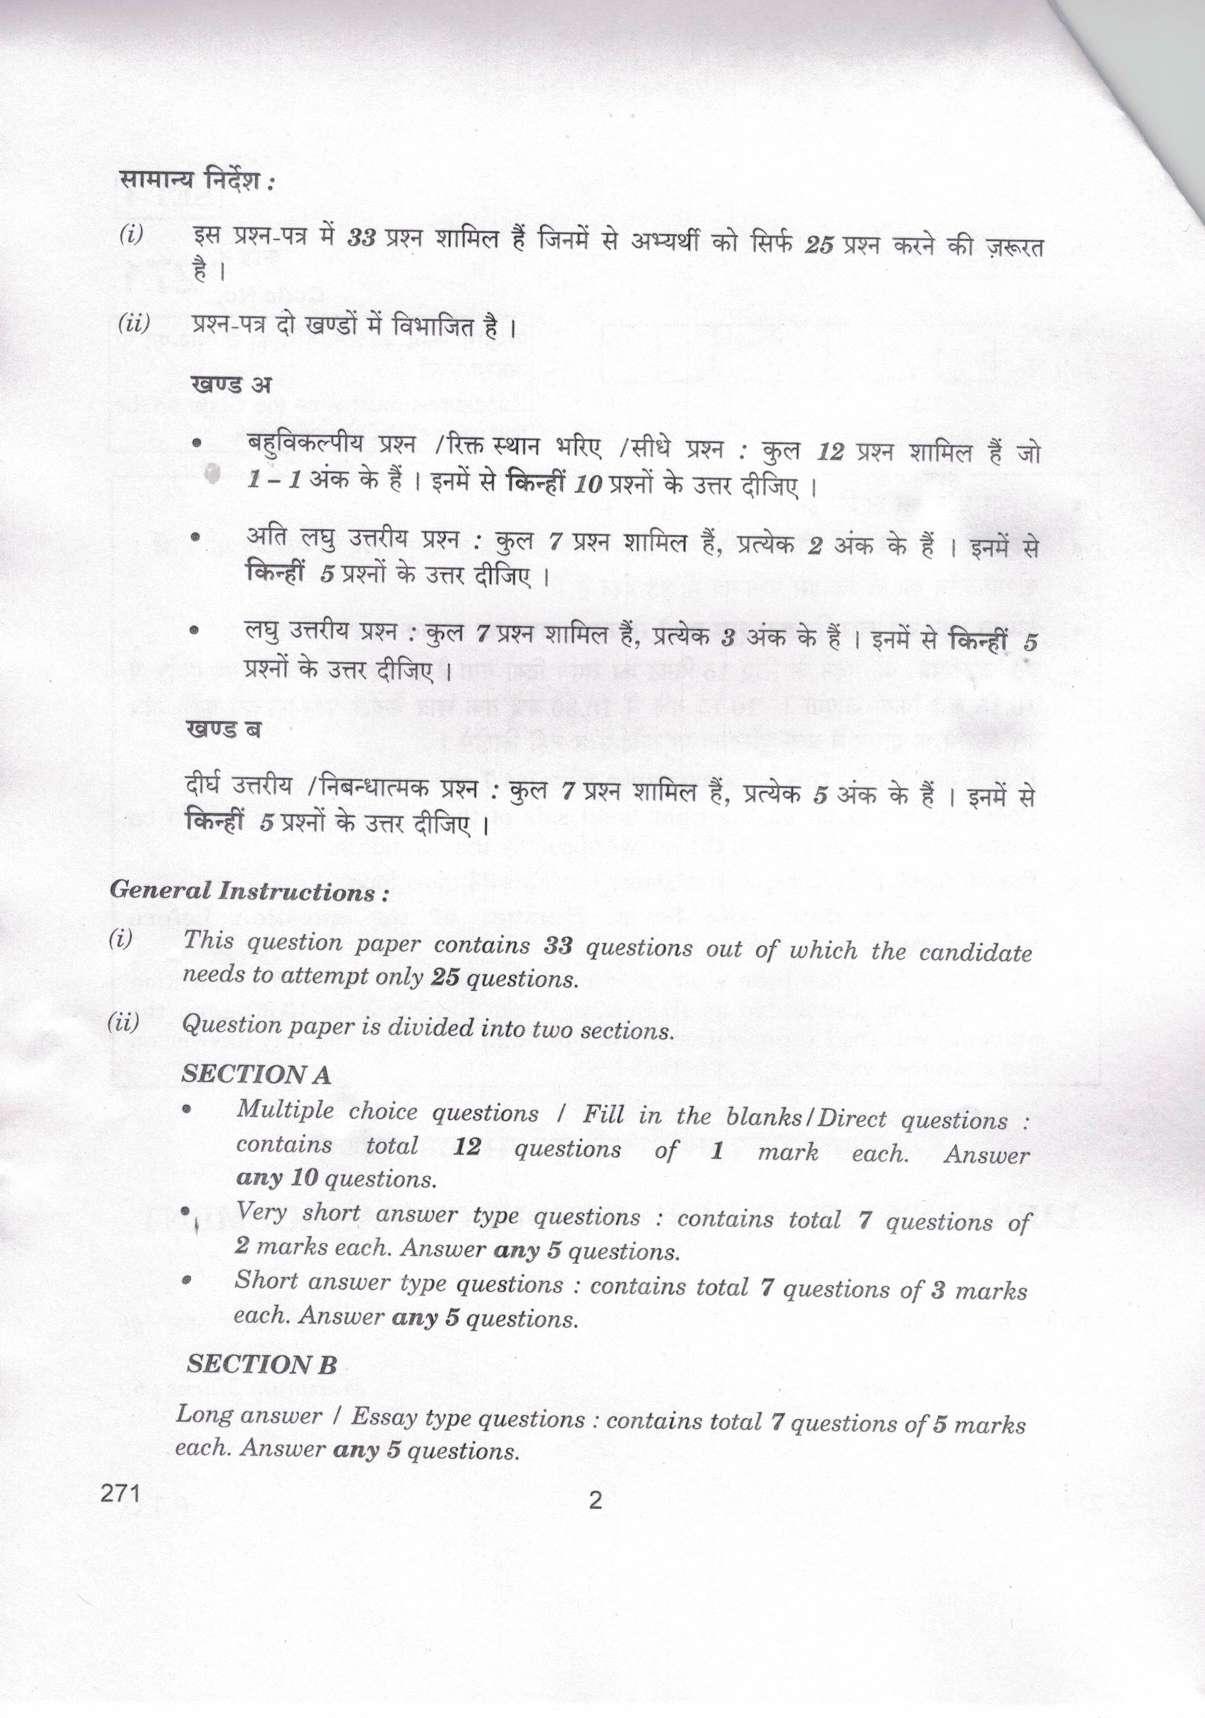 CBSE Class 12 271 Libray Systems And Resource Management_compressed 2019 Question Paper - Page 2